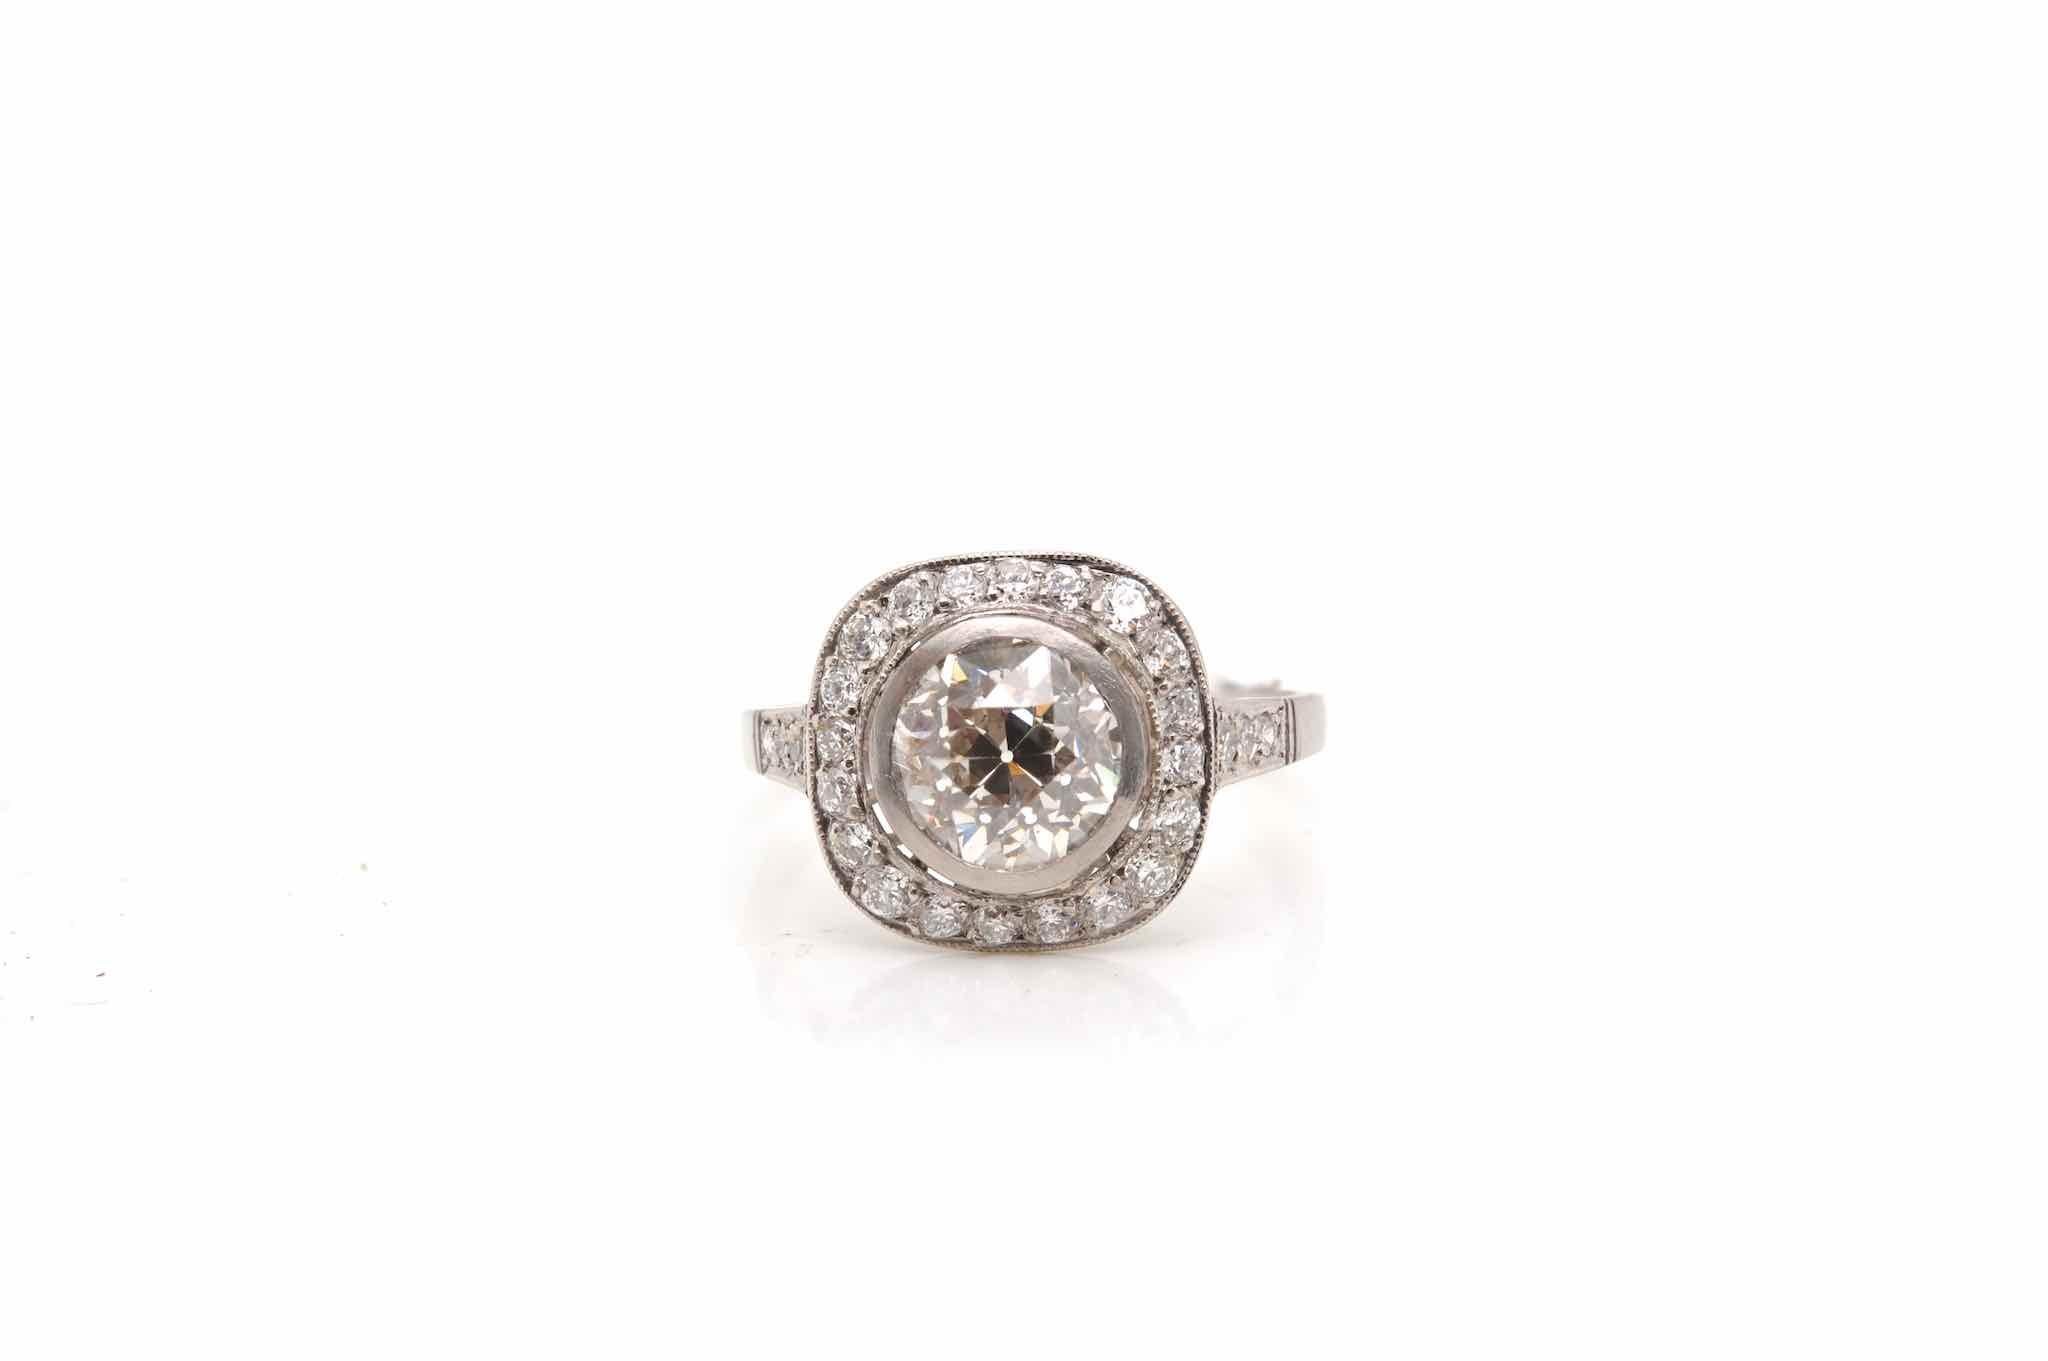 Stones: Old cut diamond of 1.73 carat K/I1
and surrounding diamonds for a total weight of 0.40 carat.
Material: Platinum
Dimensions: 12 mm length on finger
Weight: 4.3g
Size: 53 (free sizing)
Certificate
Ref. : 23324 / 24784